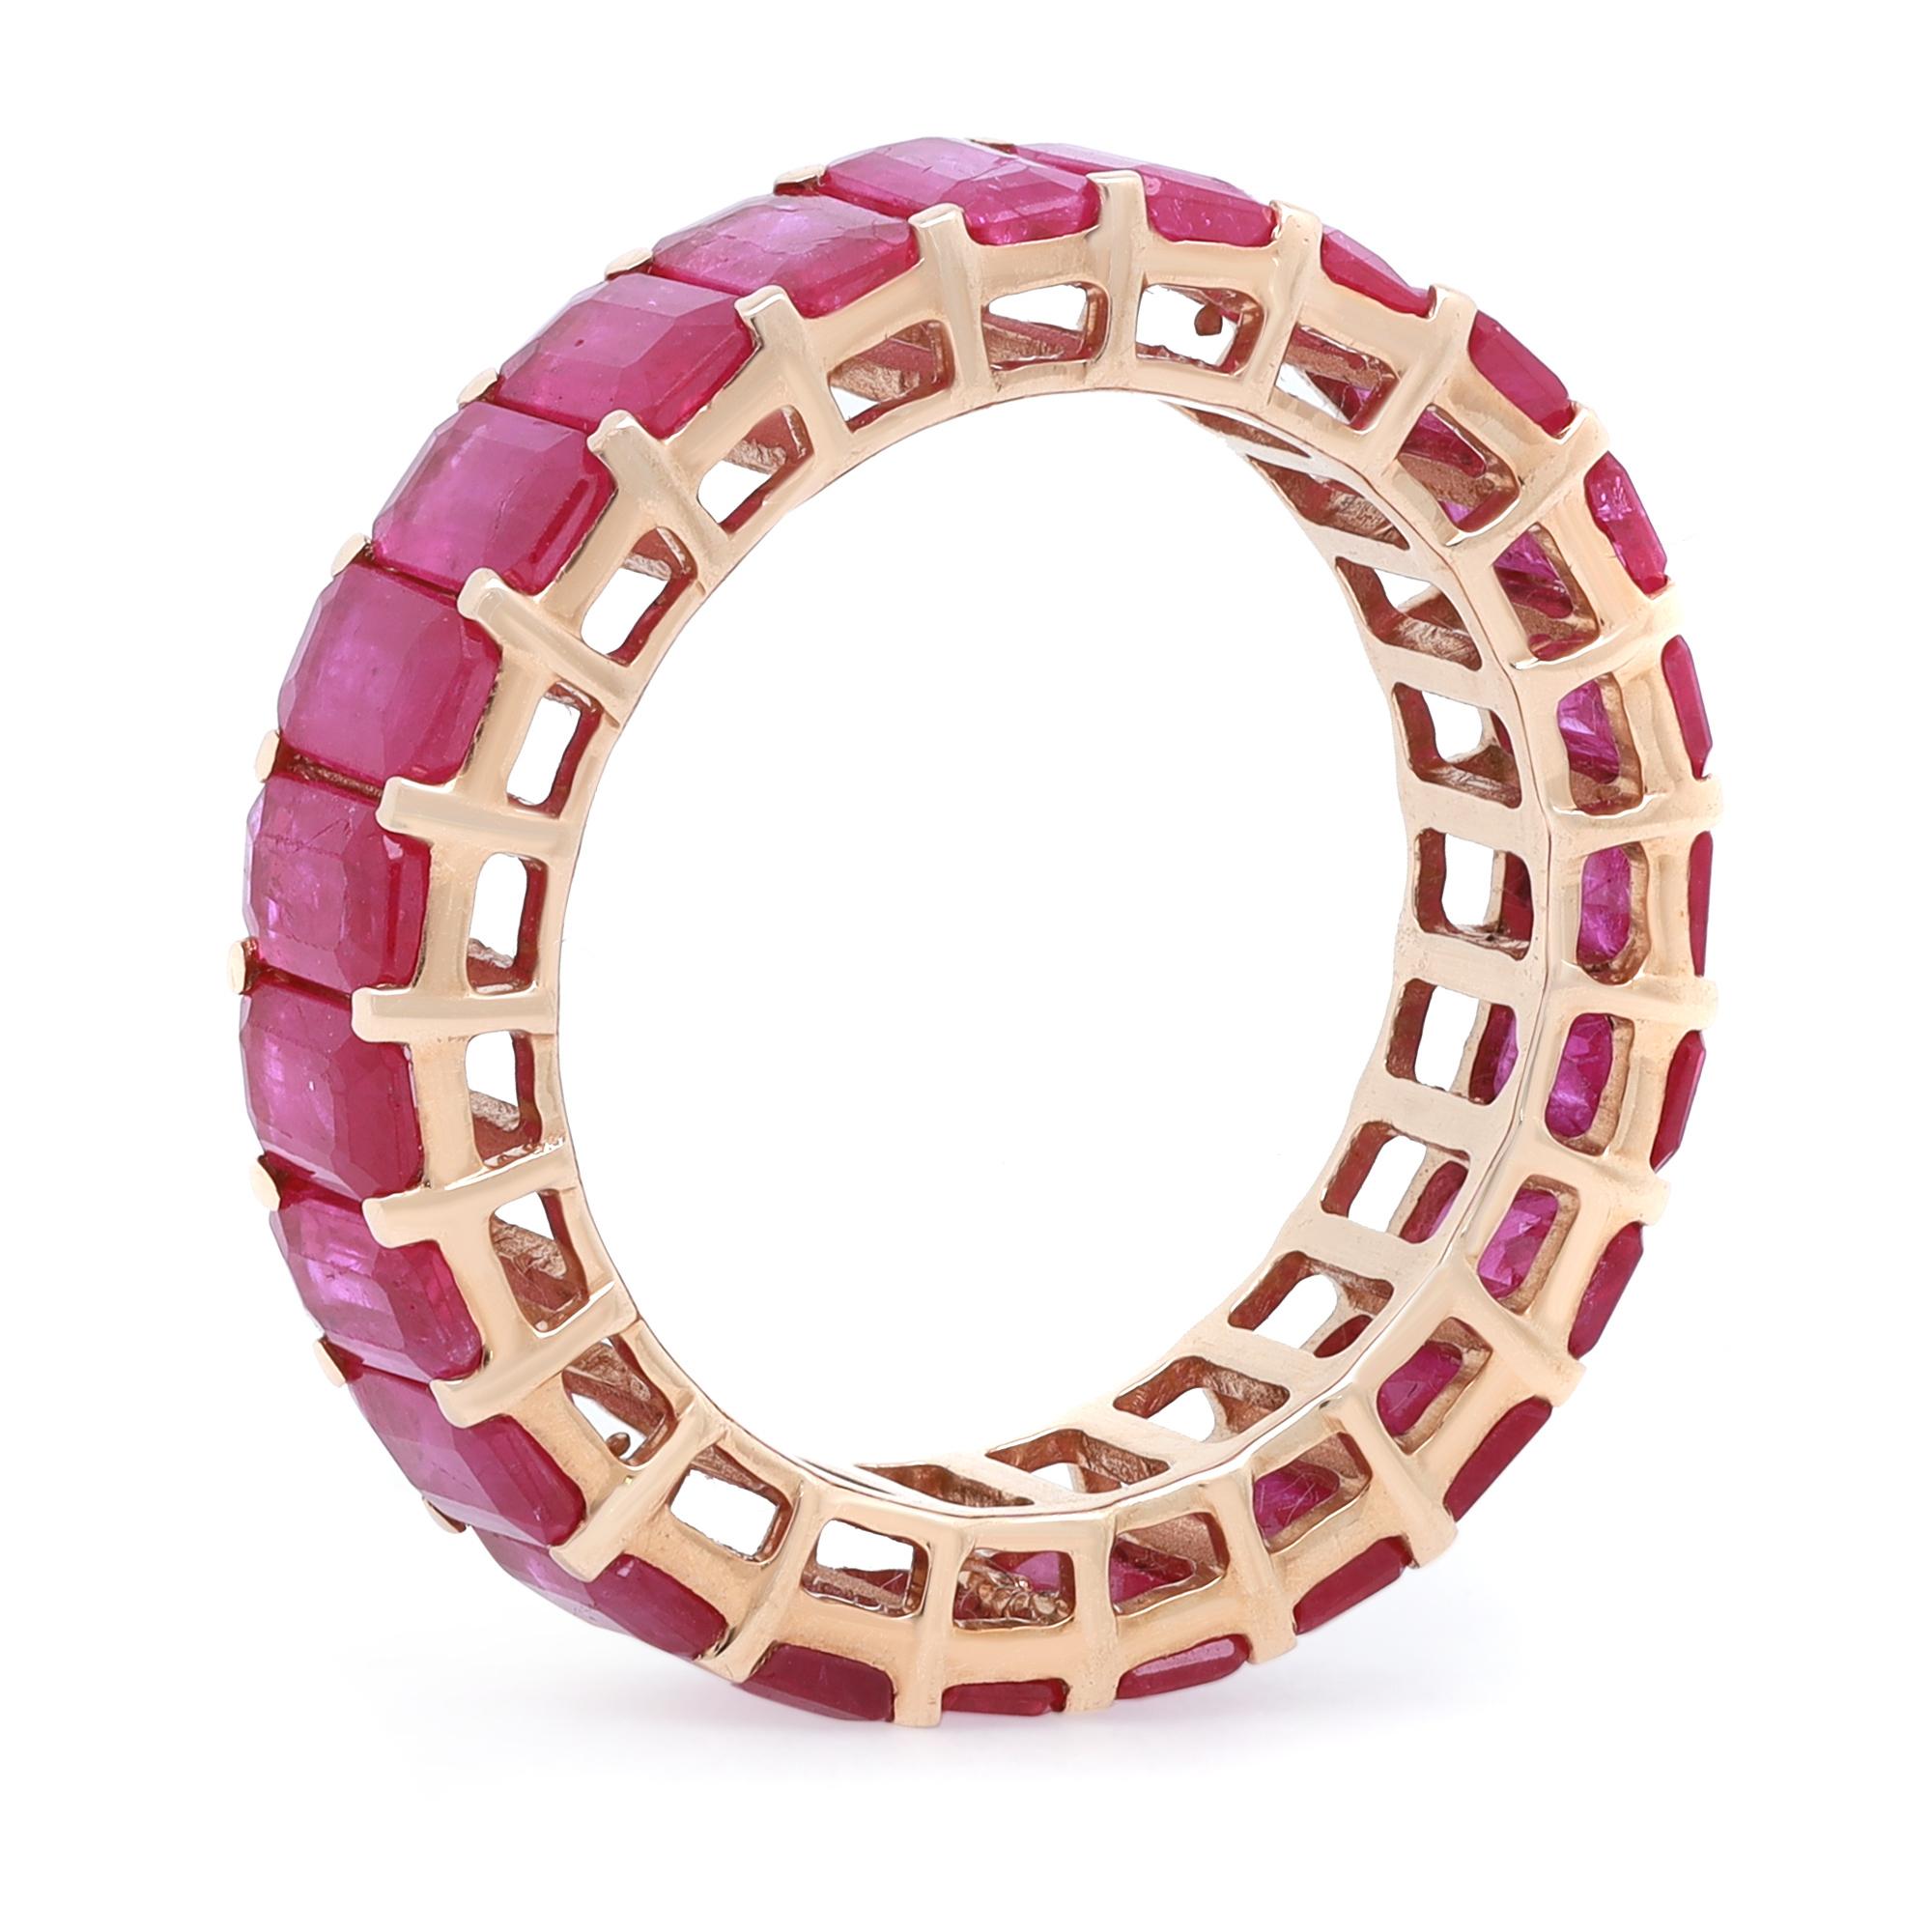 This classic timeless eternity band is a perfect stackable ring. Enchanting and irresistibly striking, this ring is beautifully crafted in fine 14K yellow gold. It features 23 prong set Emerald cut Rubies weighing 6.92 carats. A sweet token of